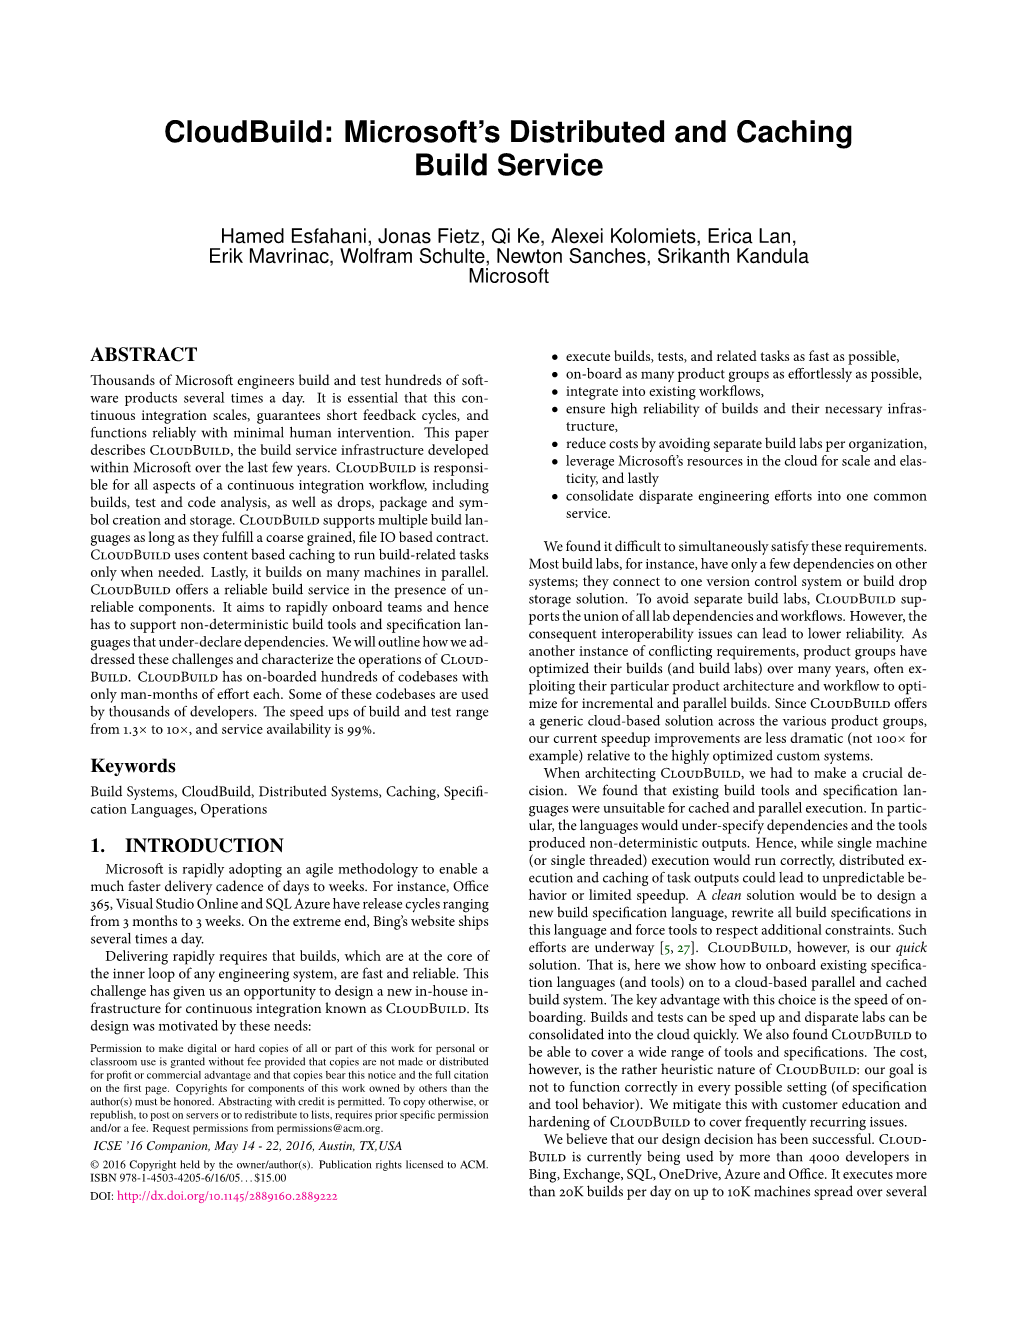 Cloudbuild: Microsoft's Distributed and Caching Build Service